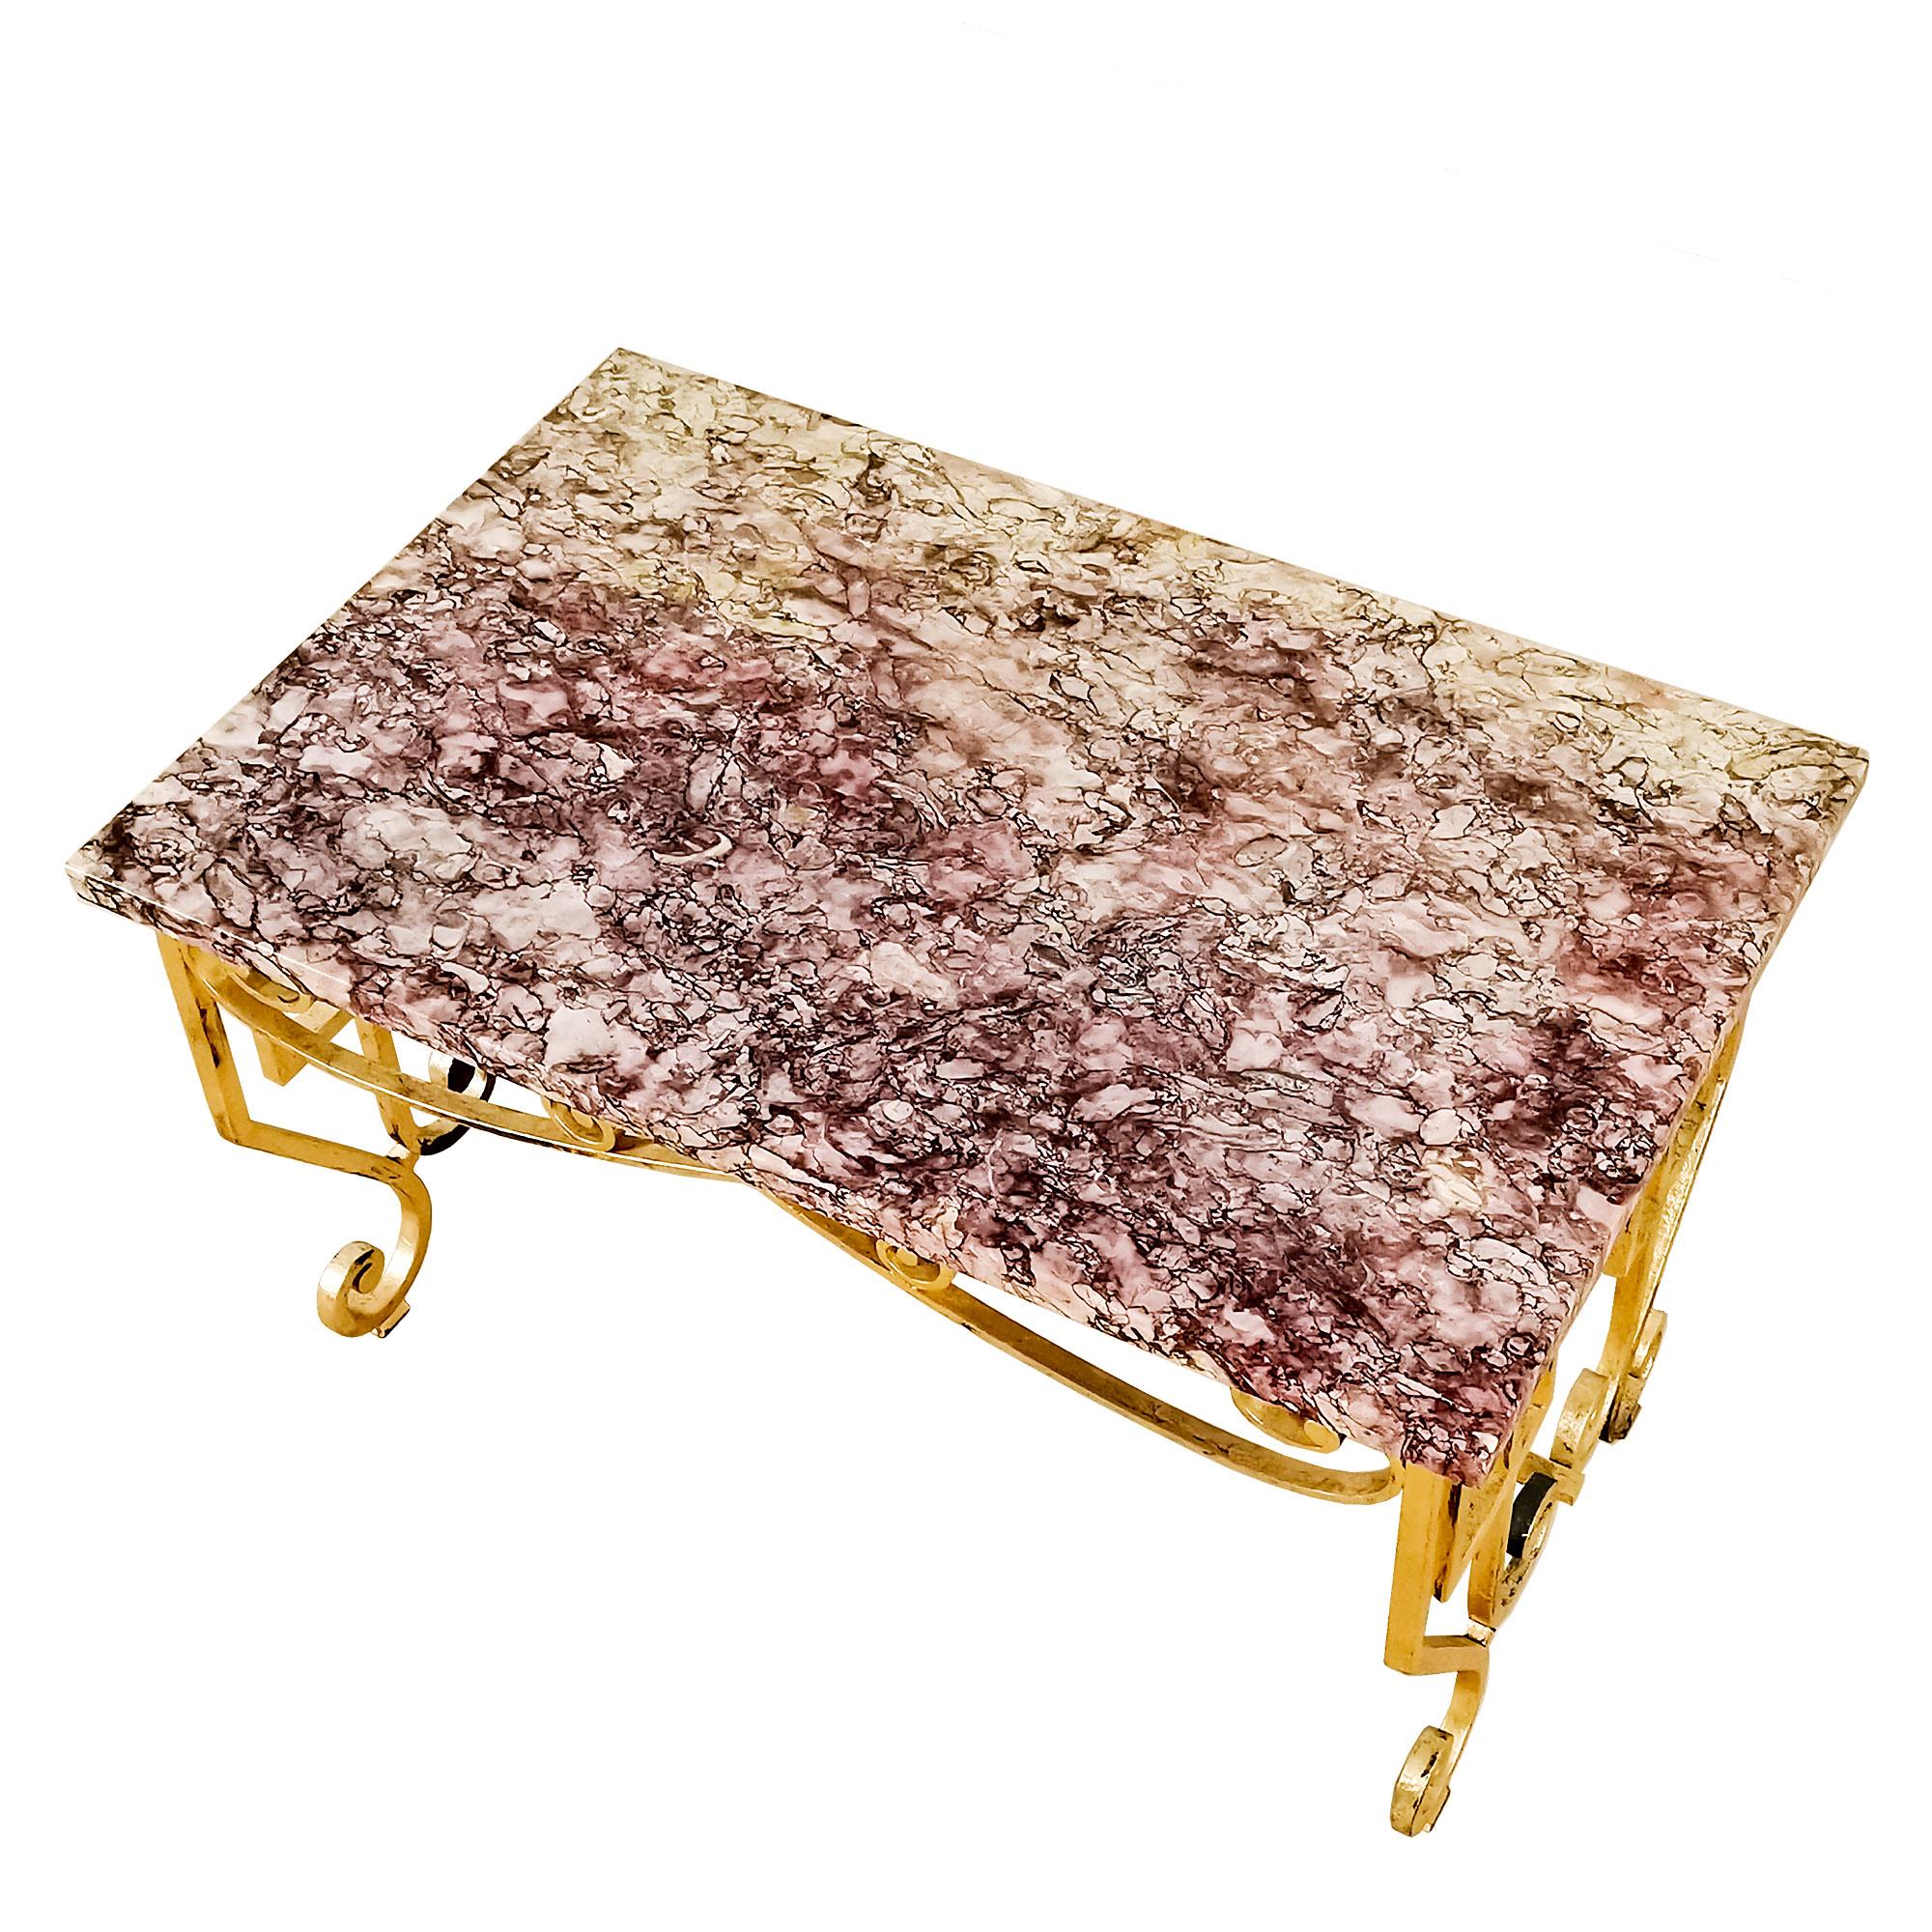 Mid-20th Century Mid-Century Modern Coffee Table in Golden Leaf Wrought Iron and Marble -France For Sale